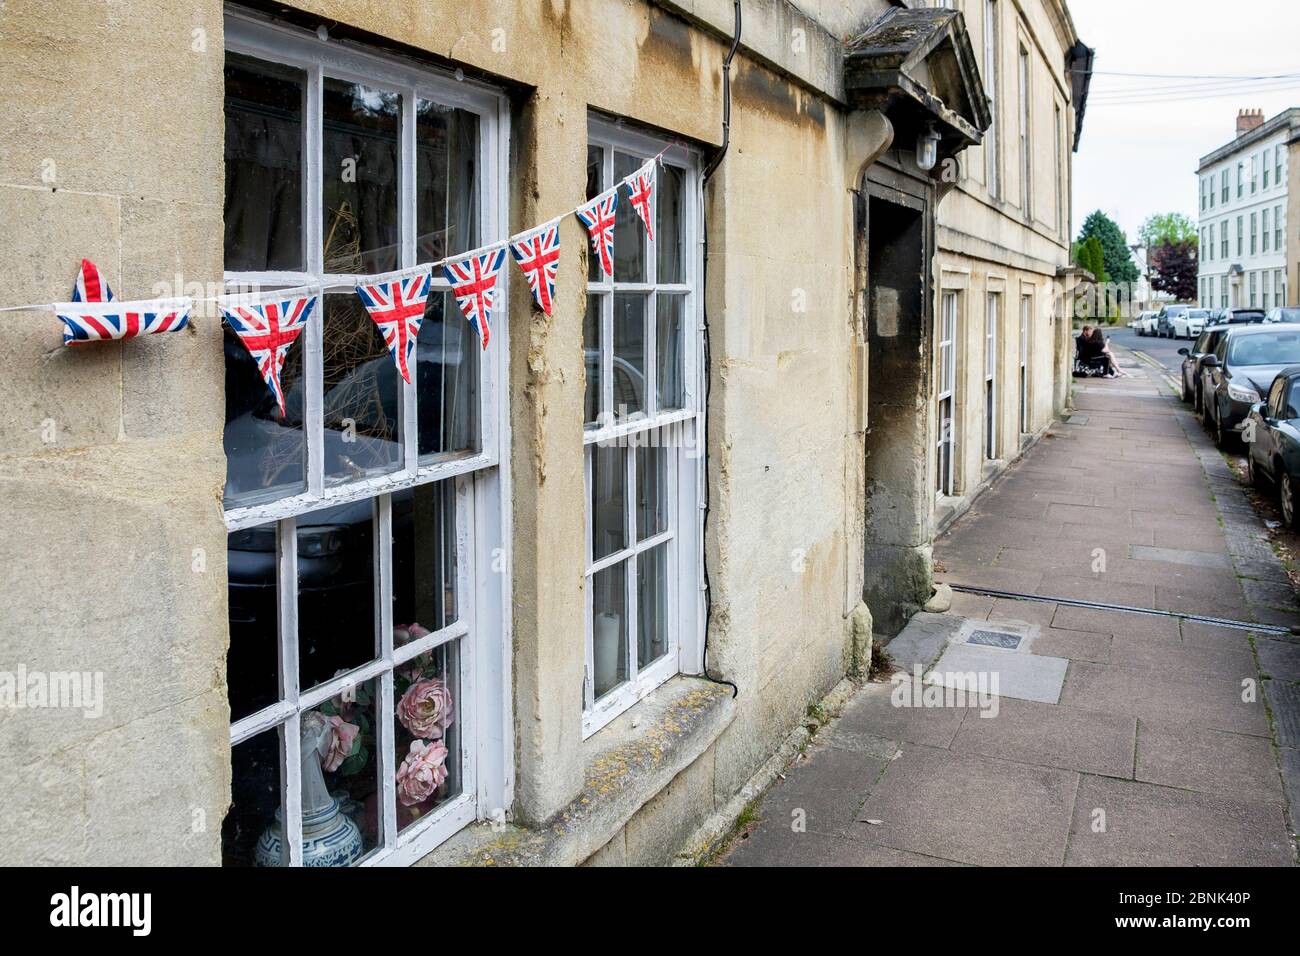 Union Jack flags and bunting is pictured on houses in Chippenham, Wiltshire as the UK commemorates the 75th Anniversary of VE Day Stock Photo